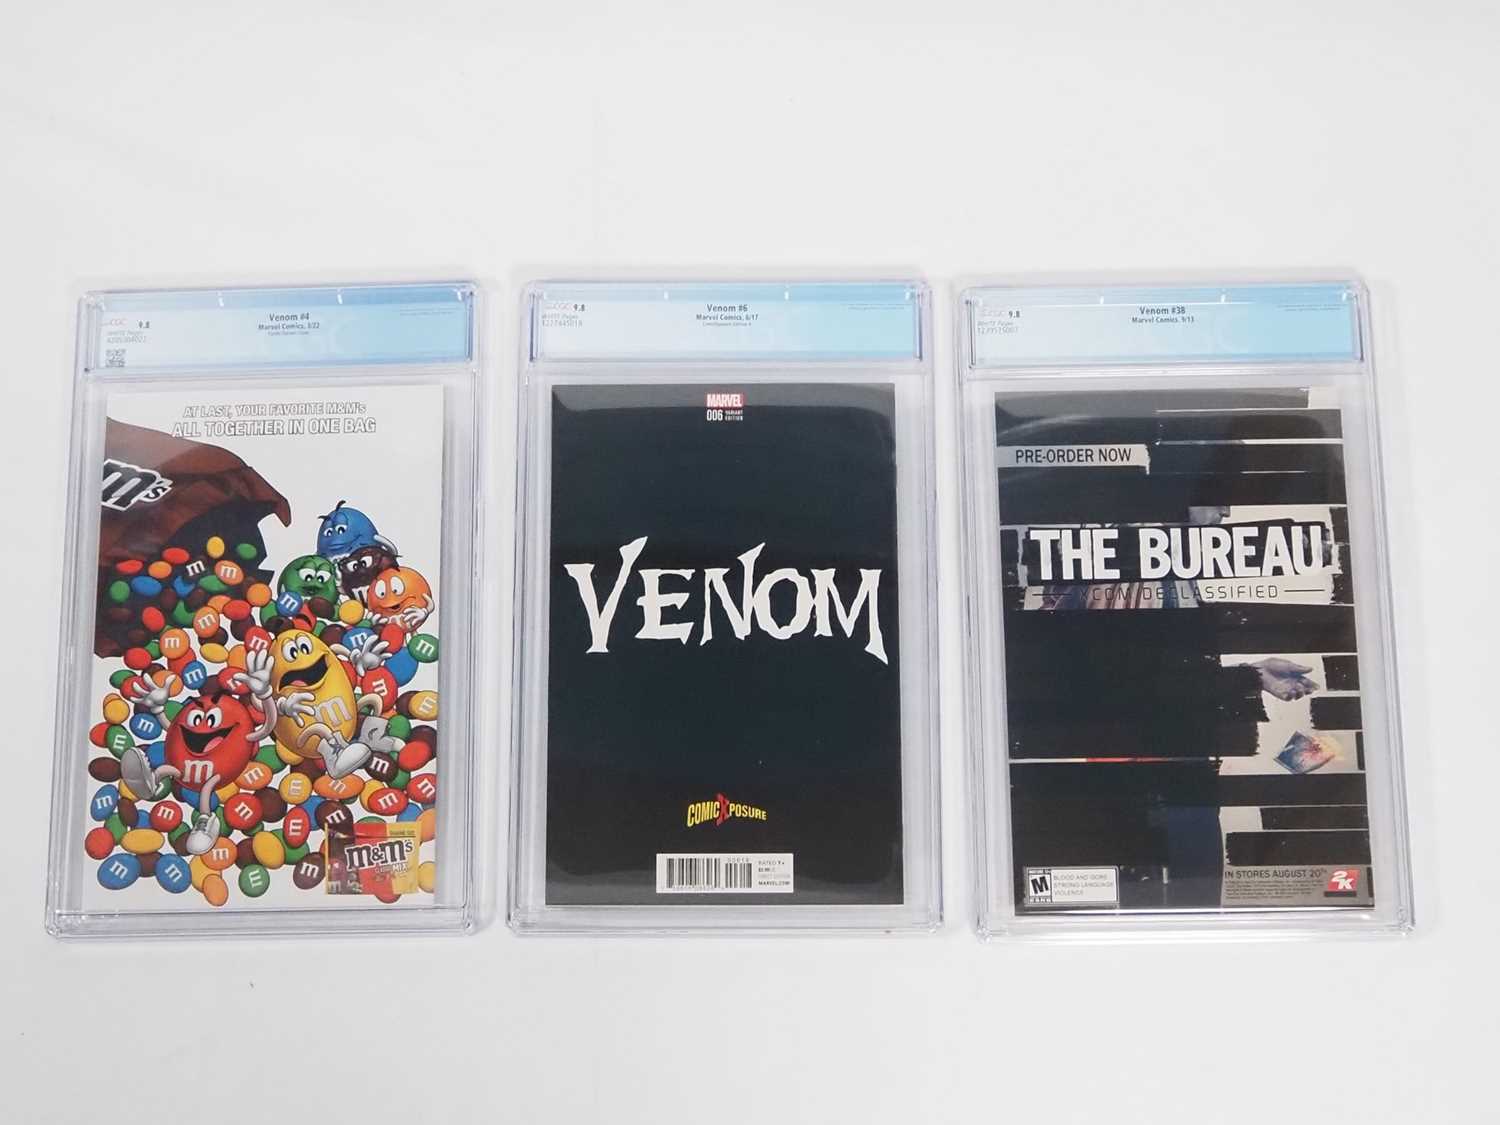 VENOM 9.8 LOT (3 in Lot) - (2013/2022 - MARVEL) All GRADED 9.8 (NM/MINT) by CGC - Includes VENOM - Image 2 of 5